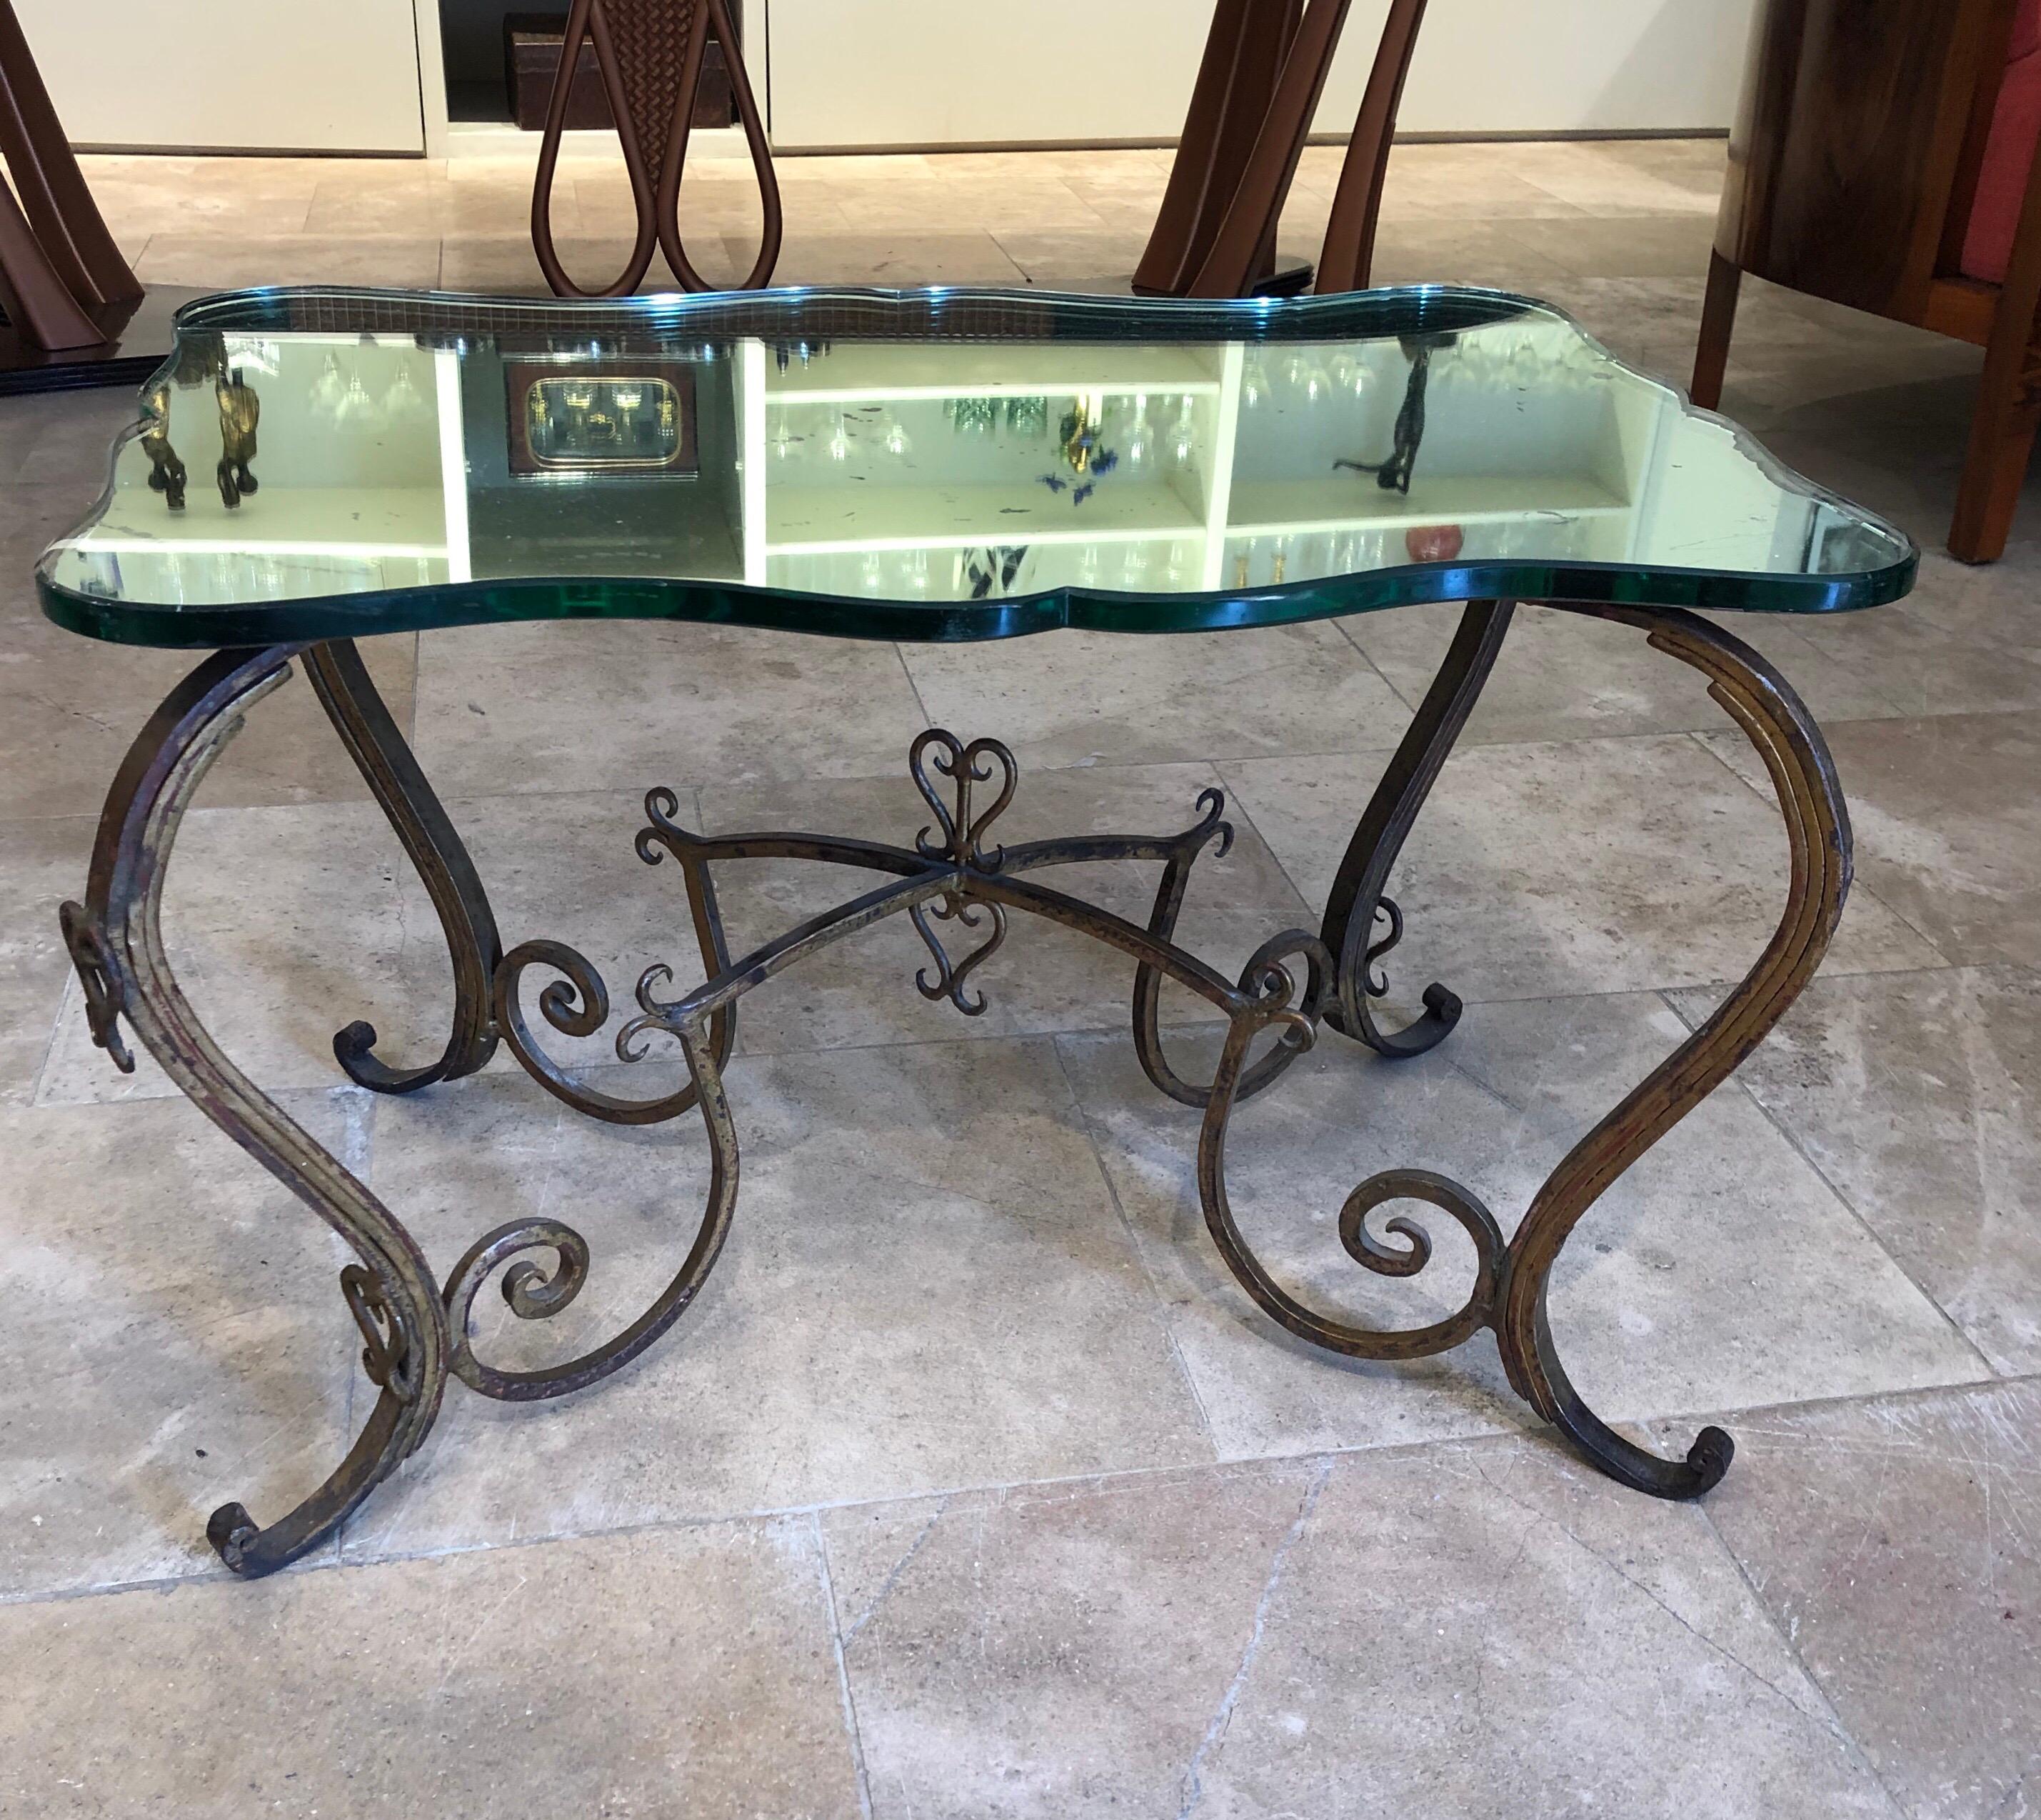 A beautiful hand forged gilded metal table with original curved glass mirrored top attributed to Rene Drouet. The mirrored top has some imperfections due to age but this adds to the beauty.